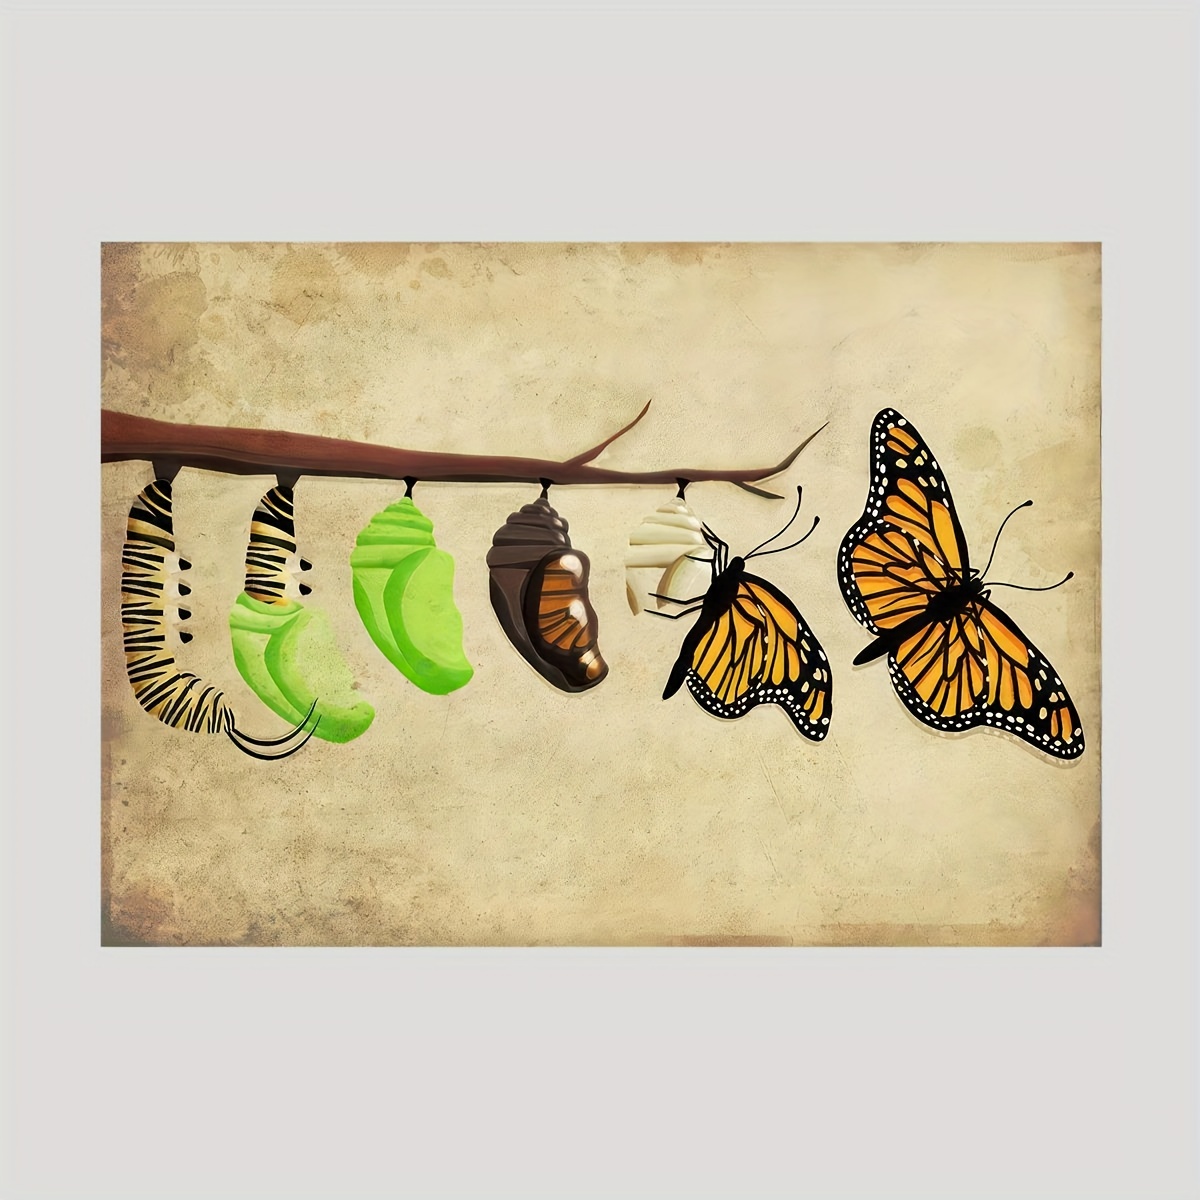 The Life Cycle of the Monarch Butterfly Poster II